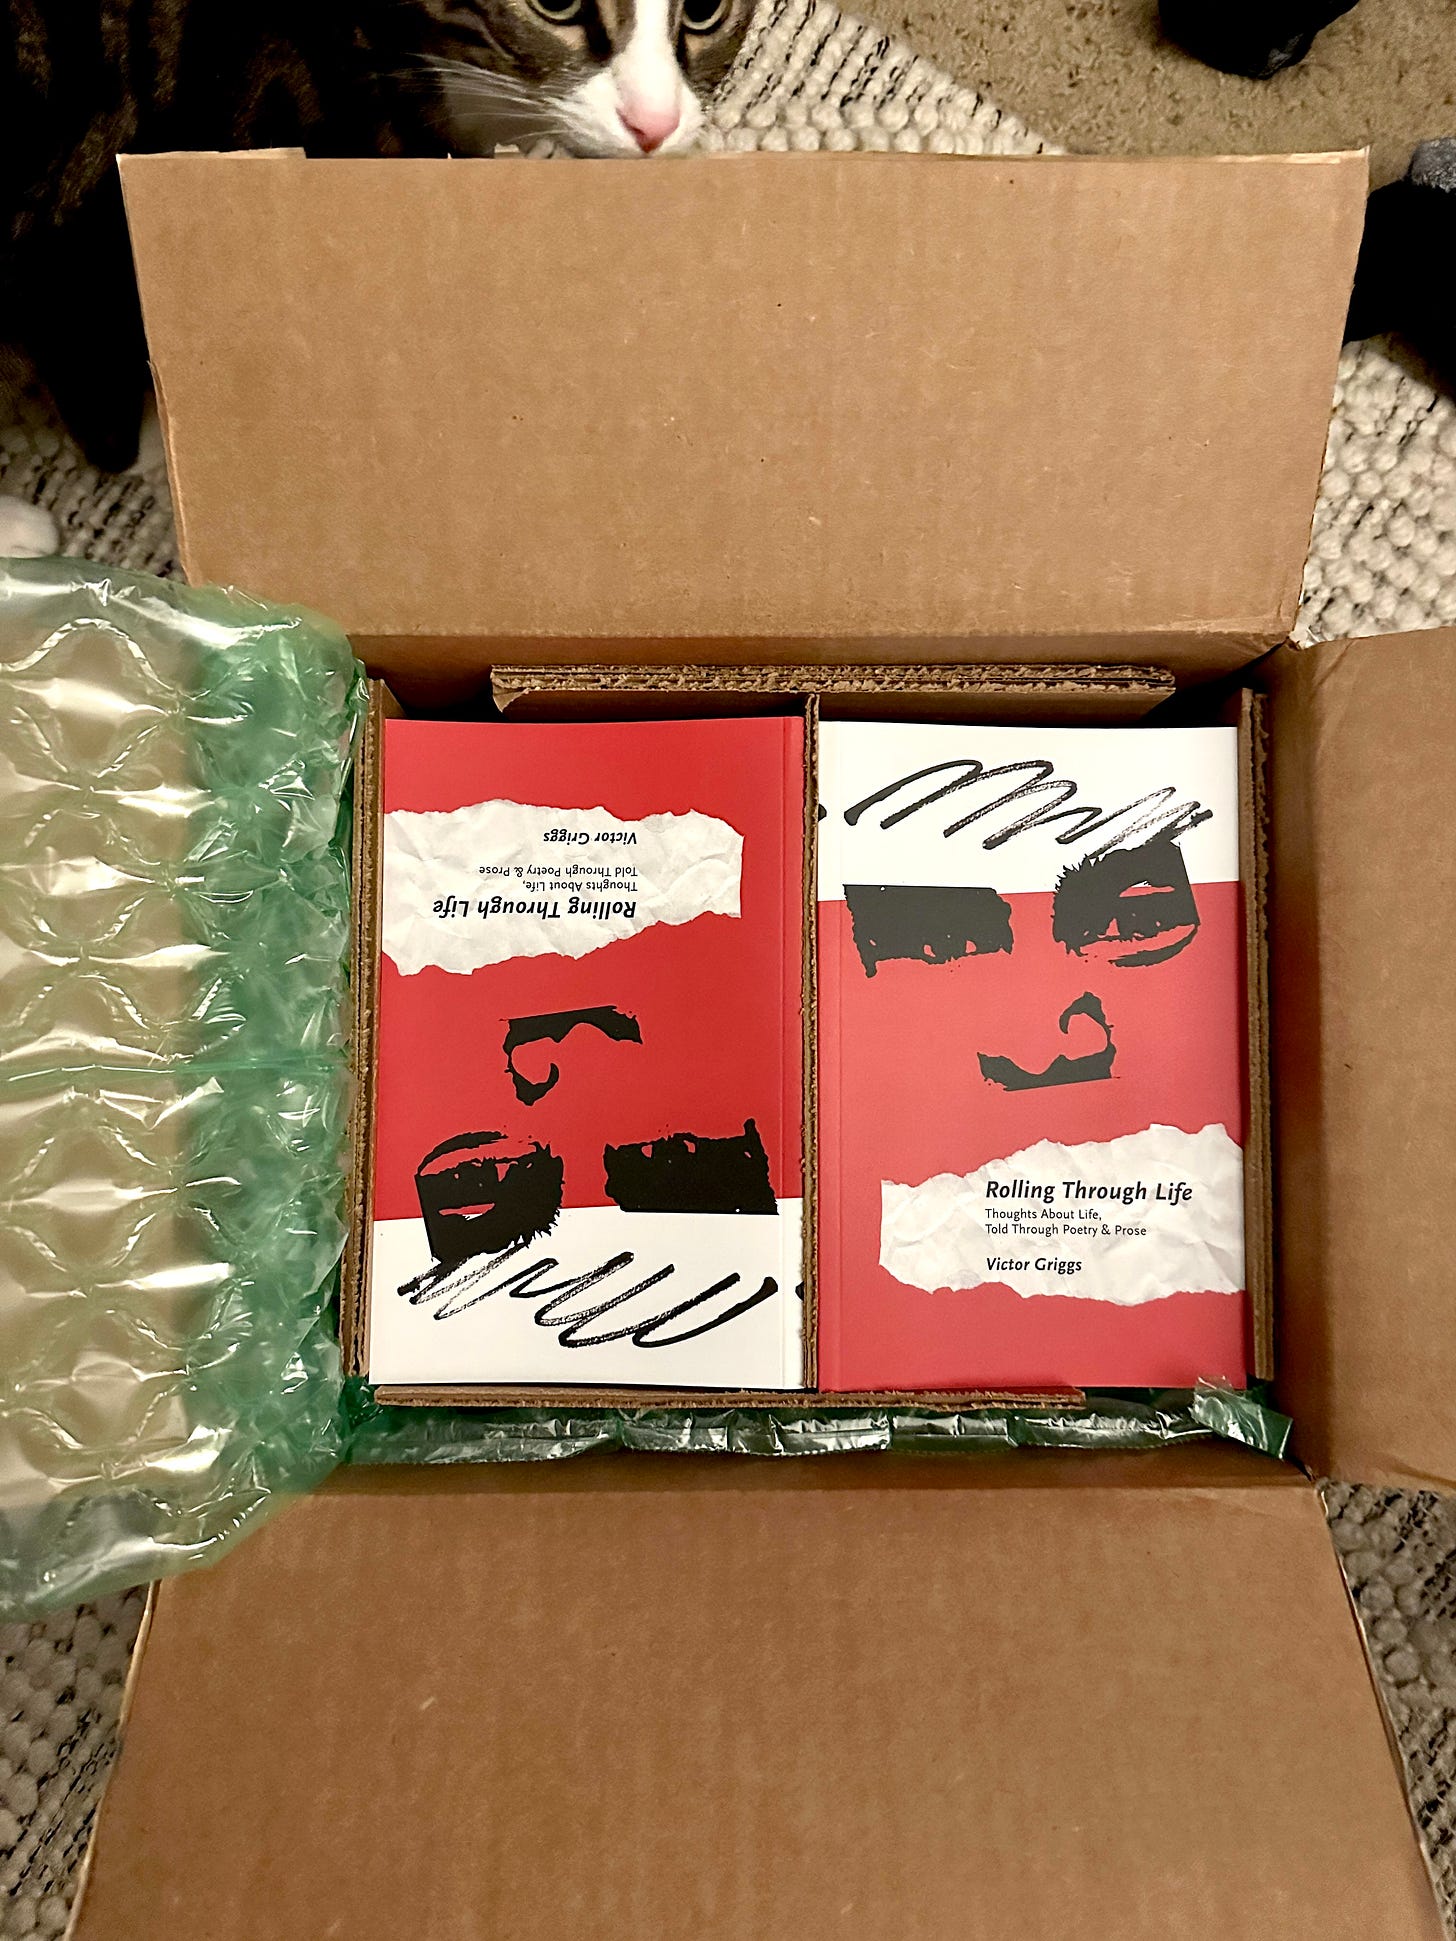 An open box with copies of the book, Rolling Through Life, on the day we received shipment of the printed copies.